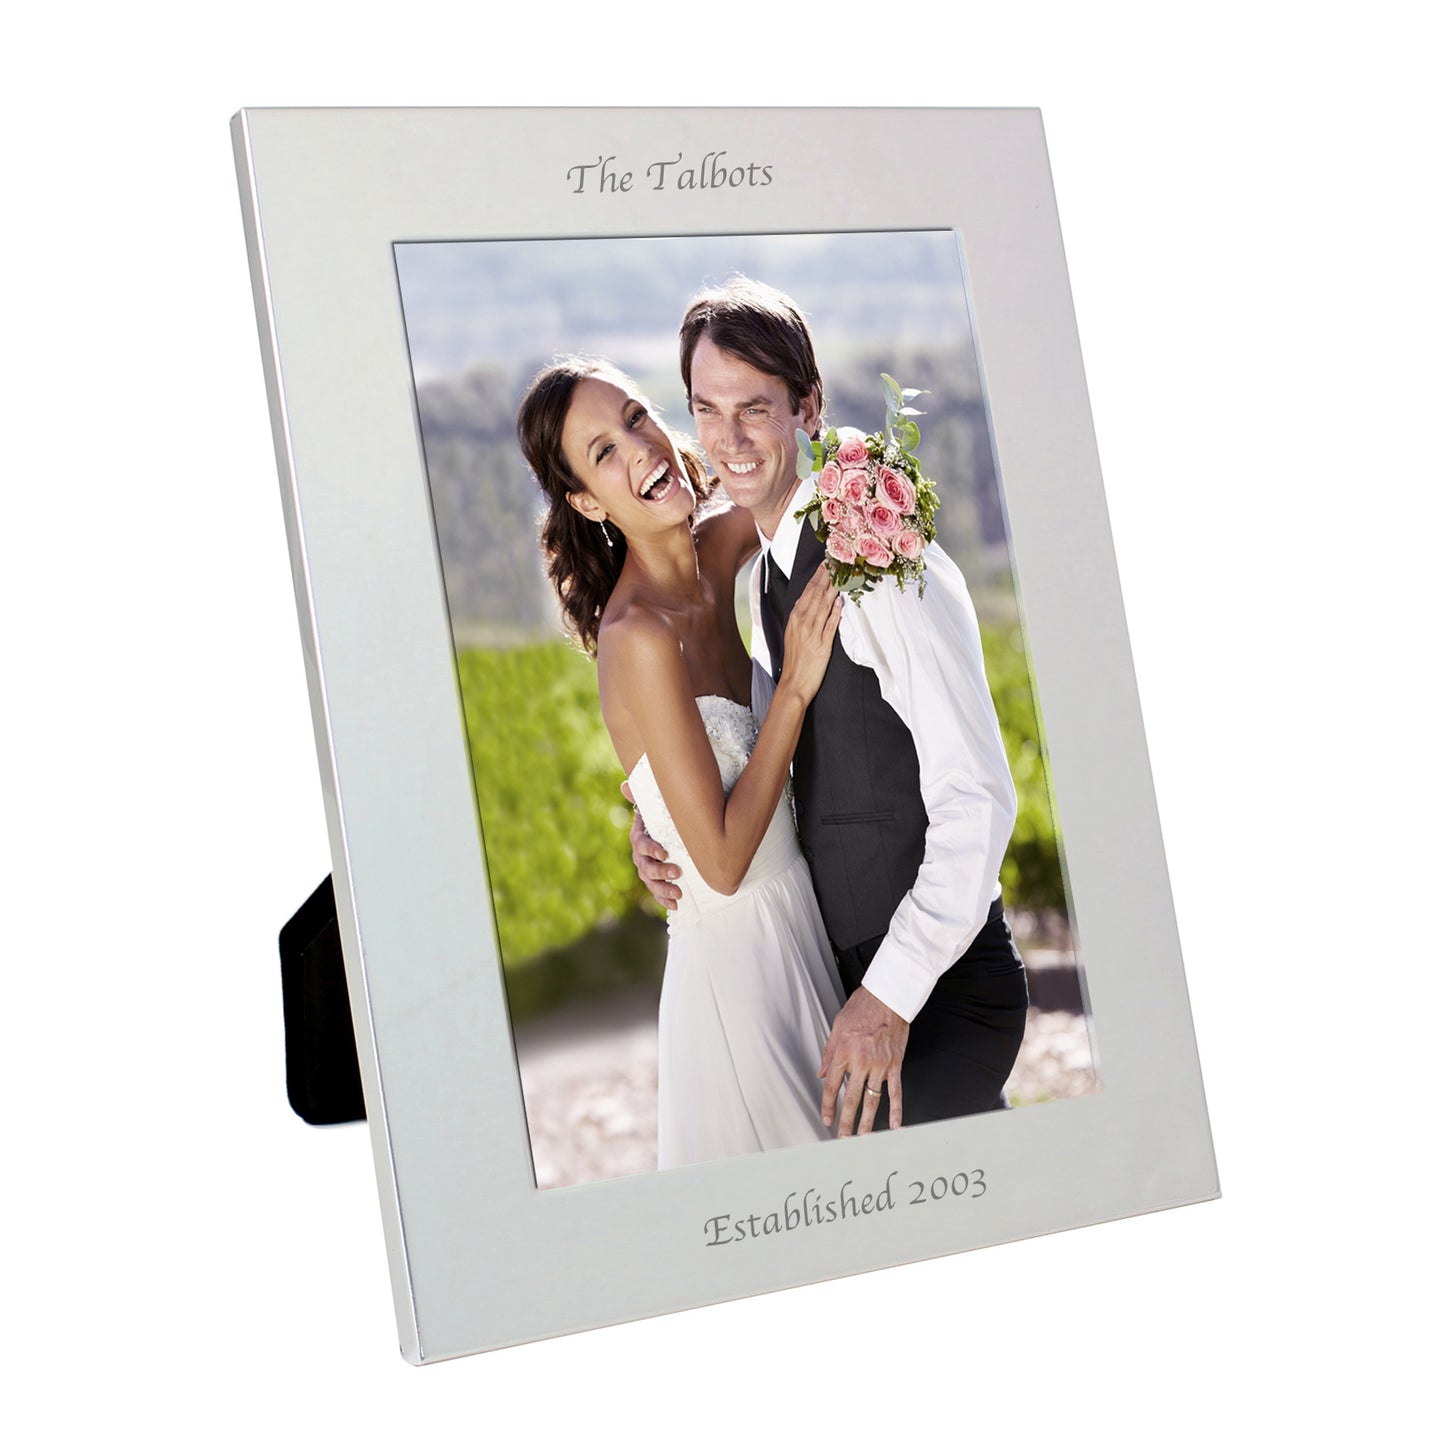 Personalised Silver 5x7 Photo Frame - Personalise It!